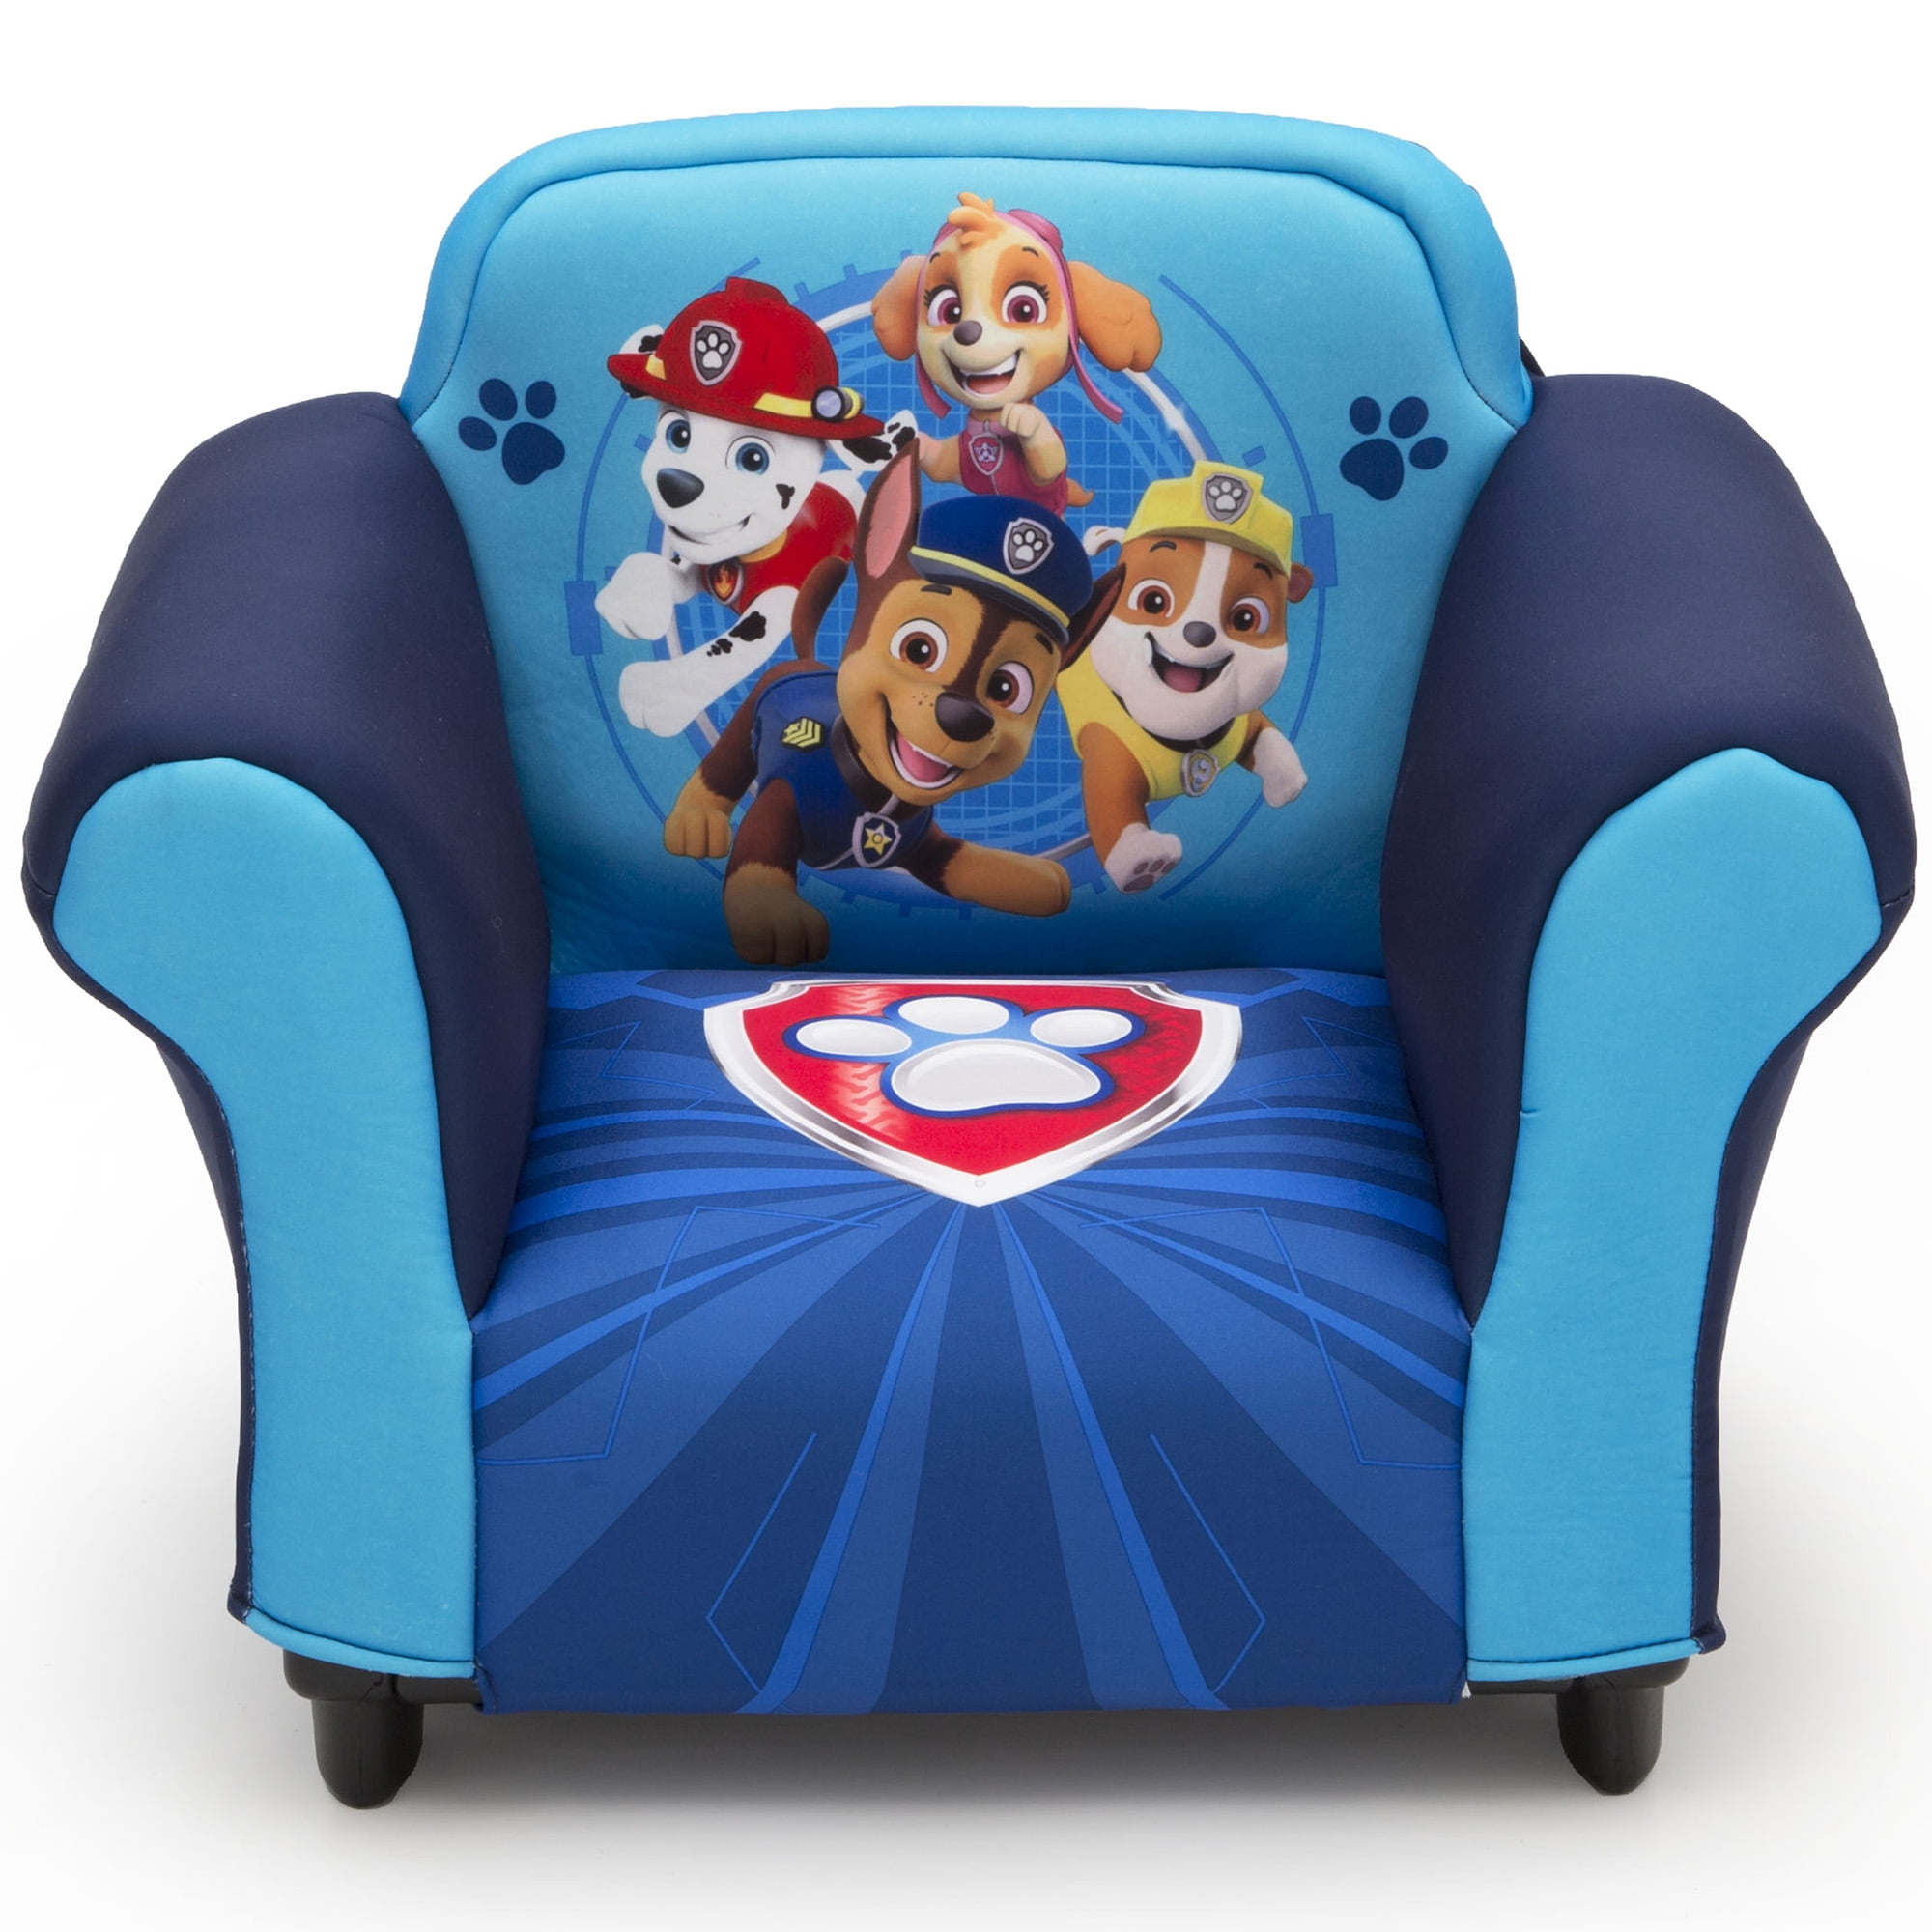 CHOOSE FROM PAW PATROL BEDROOM FURNITURE CHAIRS KIDS BEDS STORAGE UNITS 